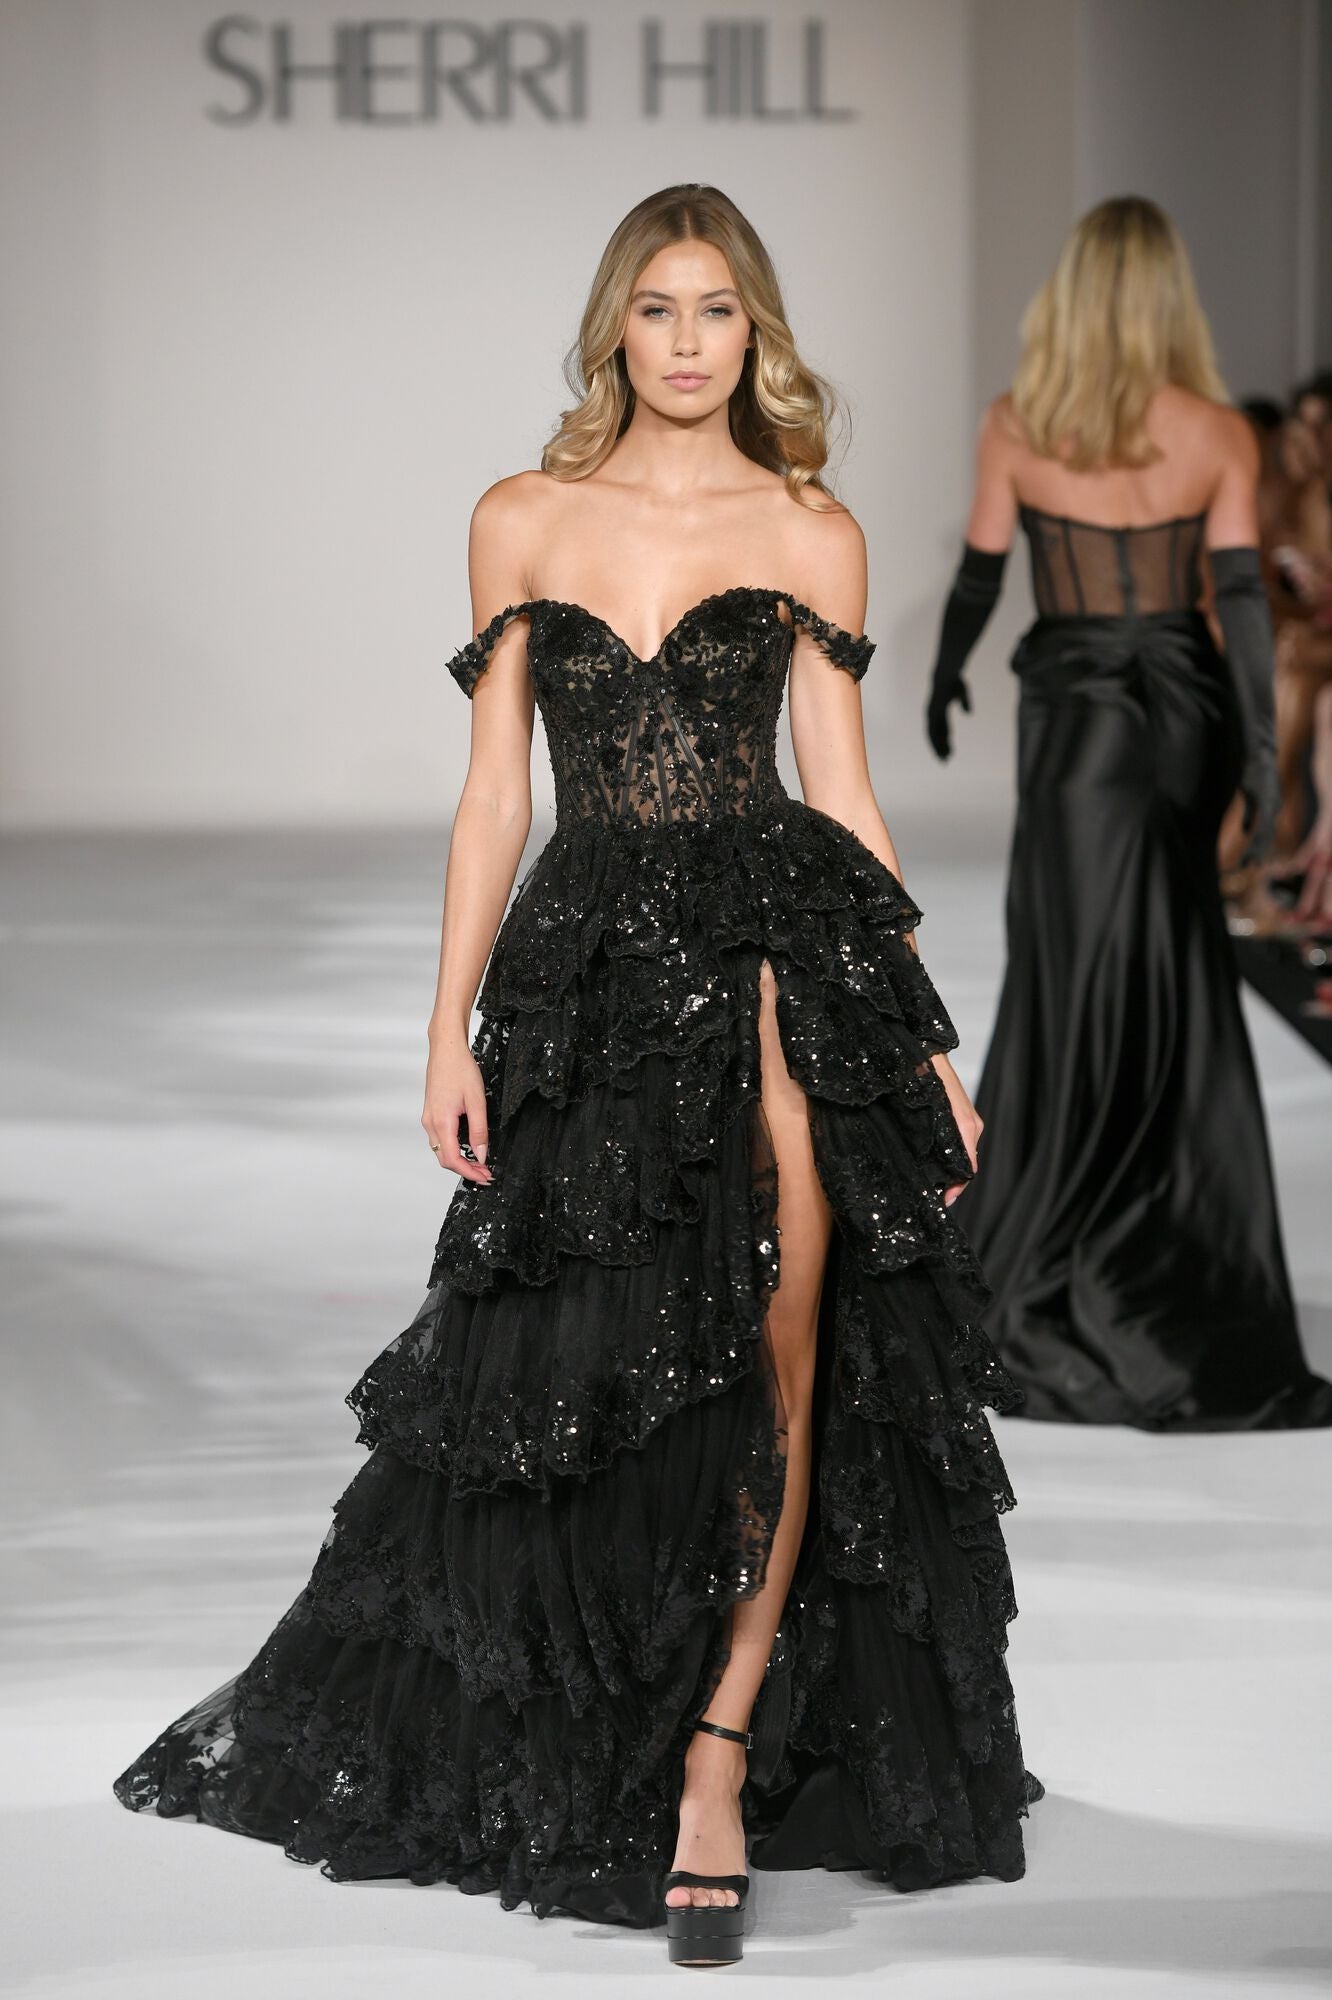 Banner showcasing SHERRI HILL Black Lace Prom and Formal Dresses for sale in Australia online at One Honey Boutique